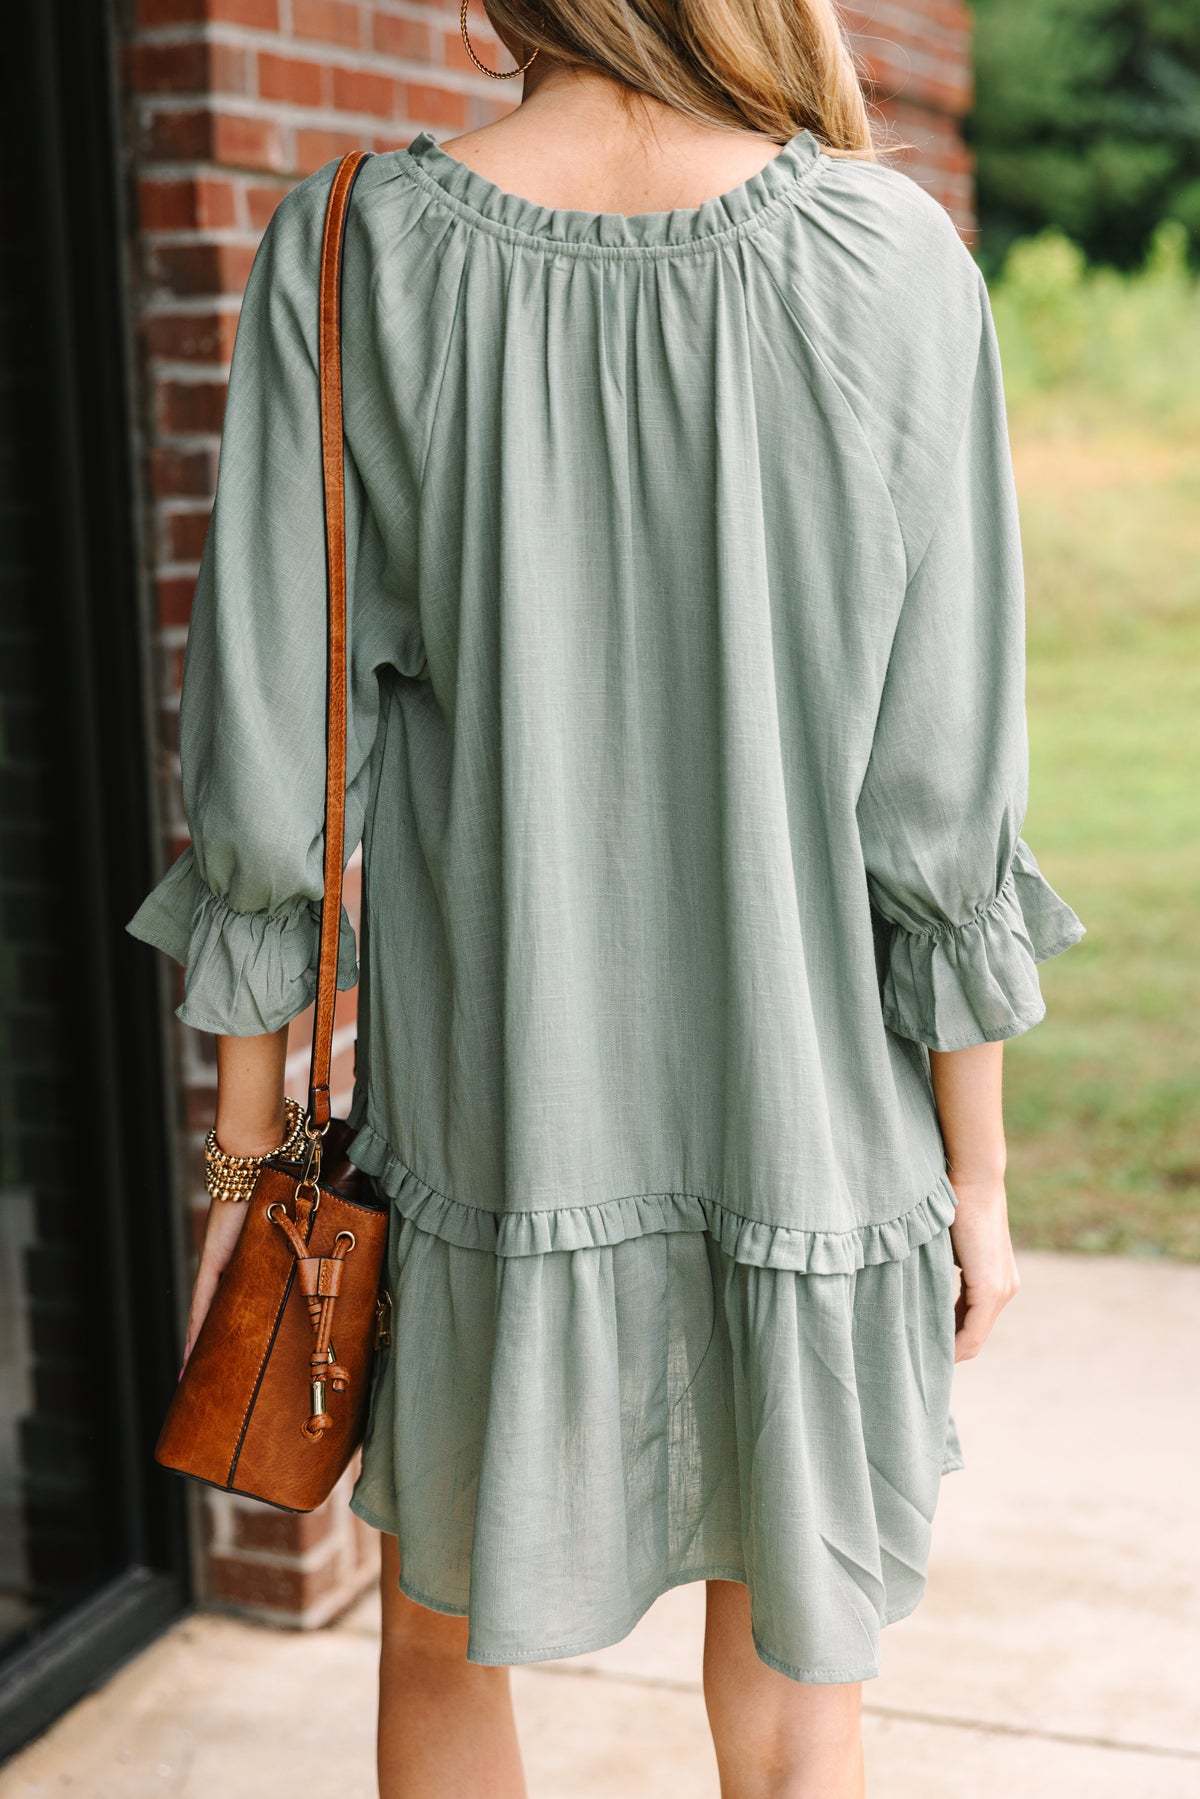 Always In The Lead Olive Green Linen Dress – Shop the Mint